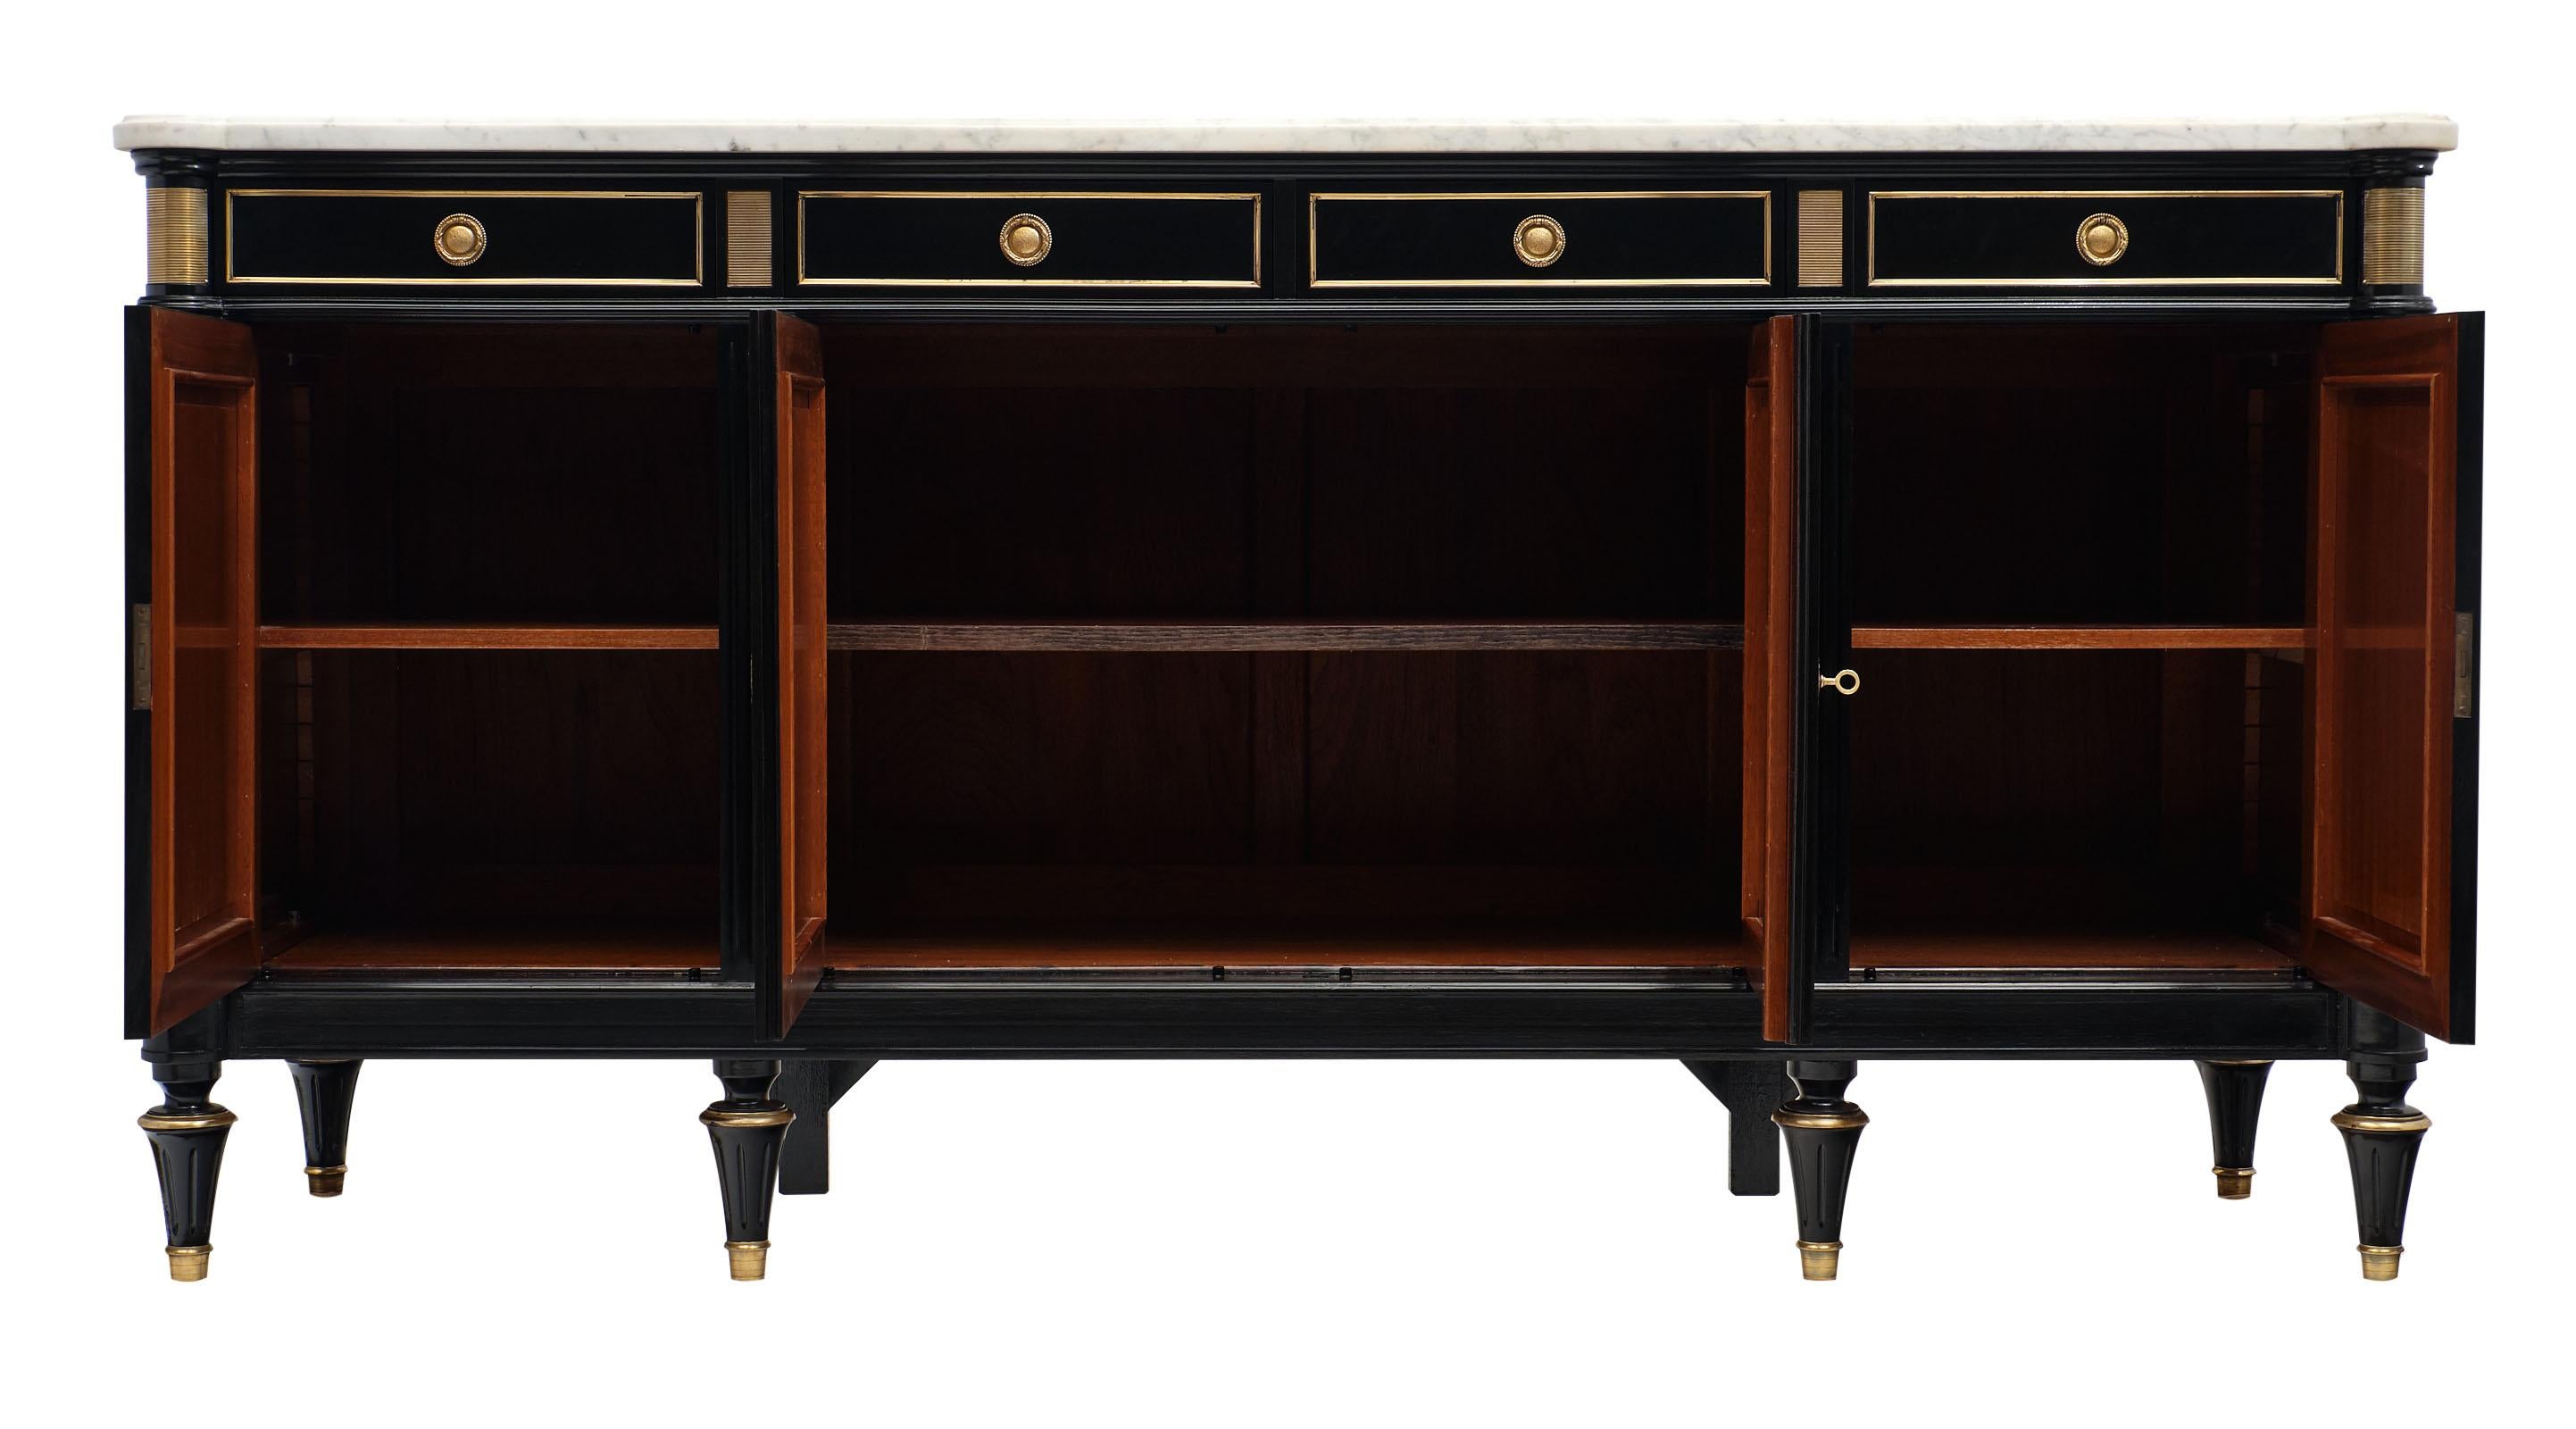 French antique Louis XVI style buffet / enfilade made of mahogany that has been ebonized and finished with a lustrous French polish. The marble slab from Carrara in Italy is original to the piece and intact. Gilt brass trims add a Classic touch